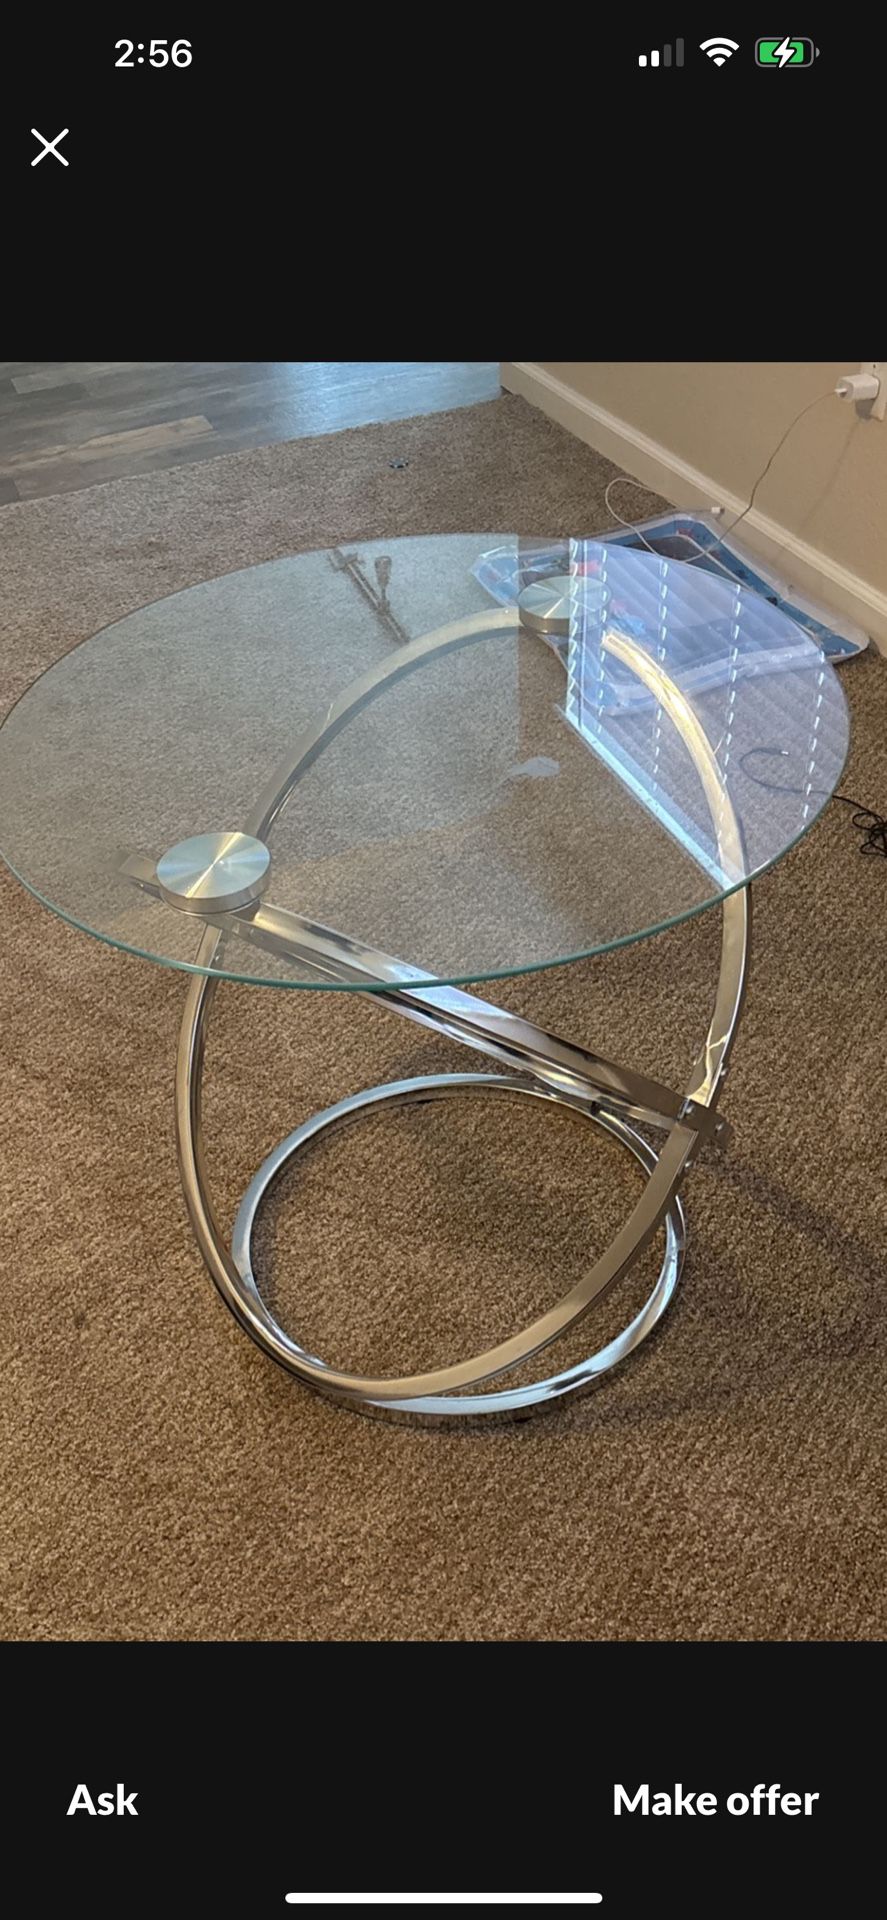 Tow New Table $50 each